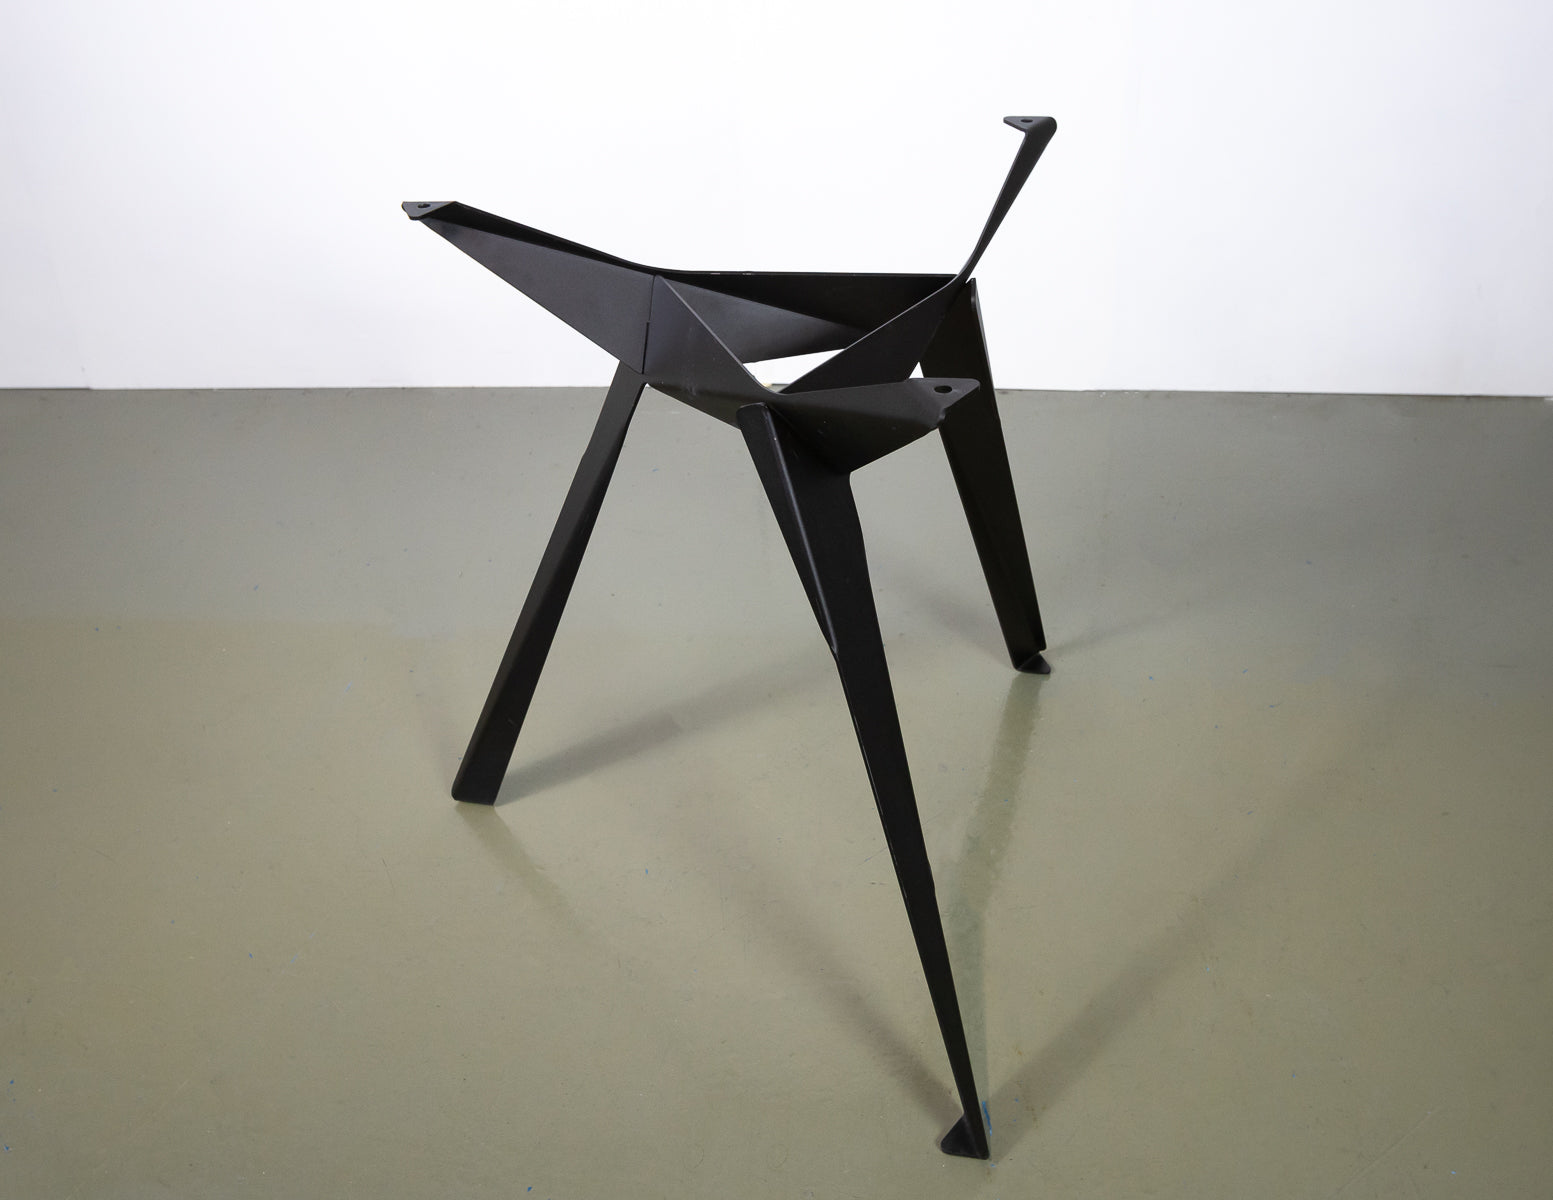 Innermost Origami 4 seater Dining Table